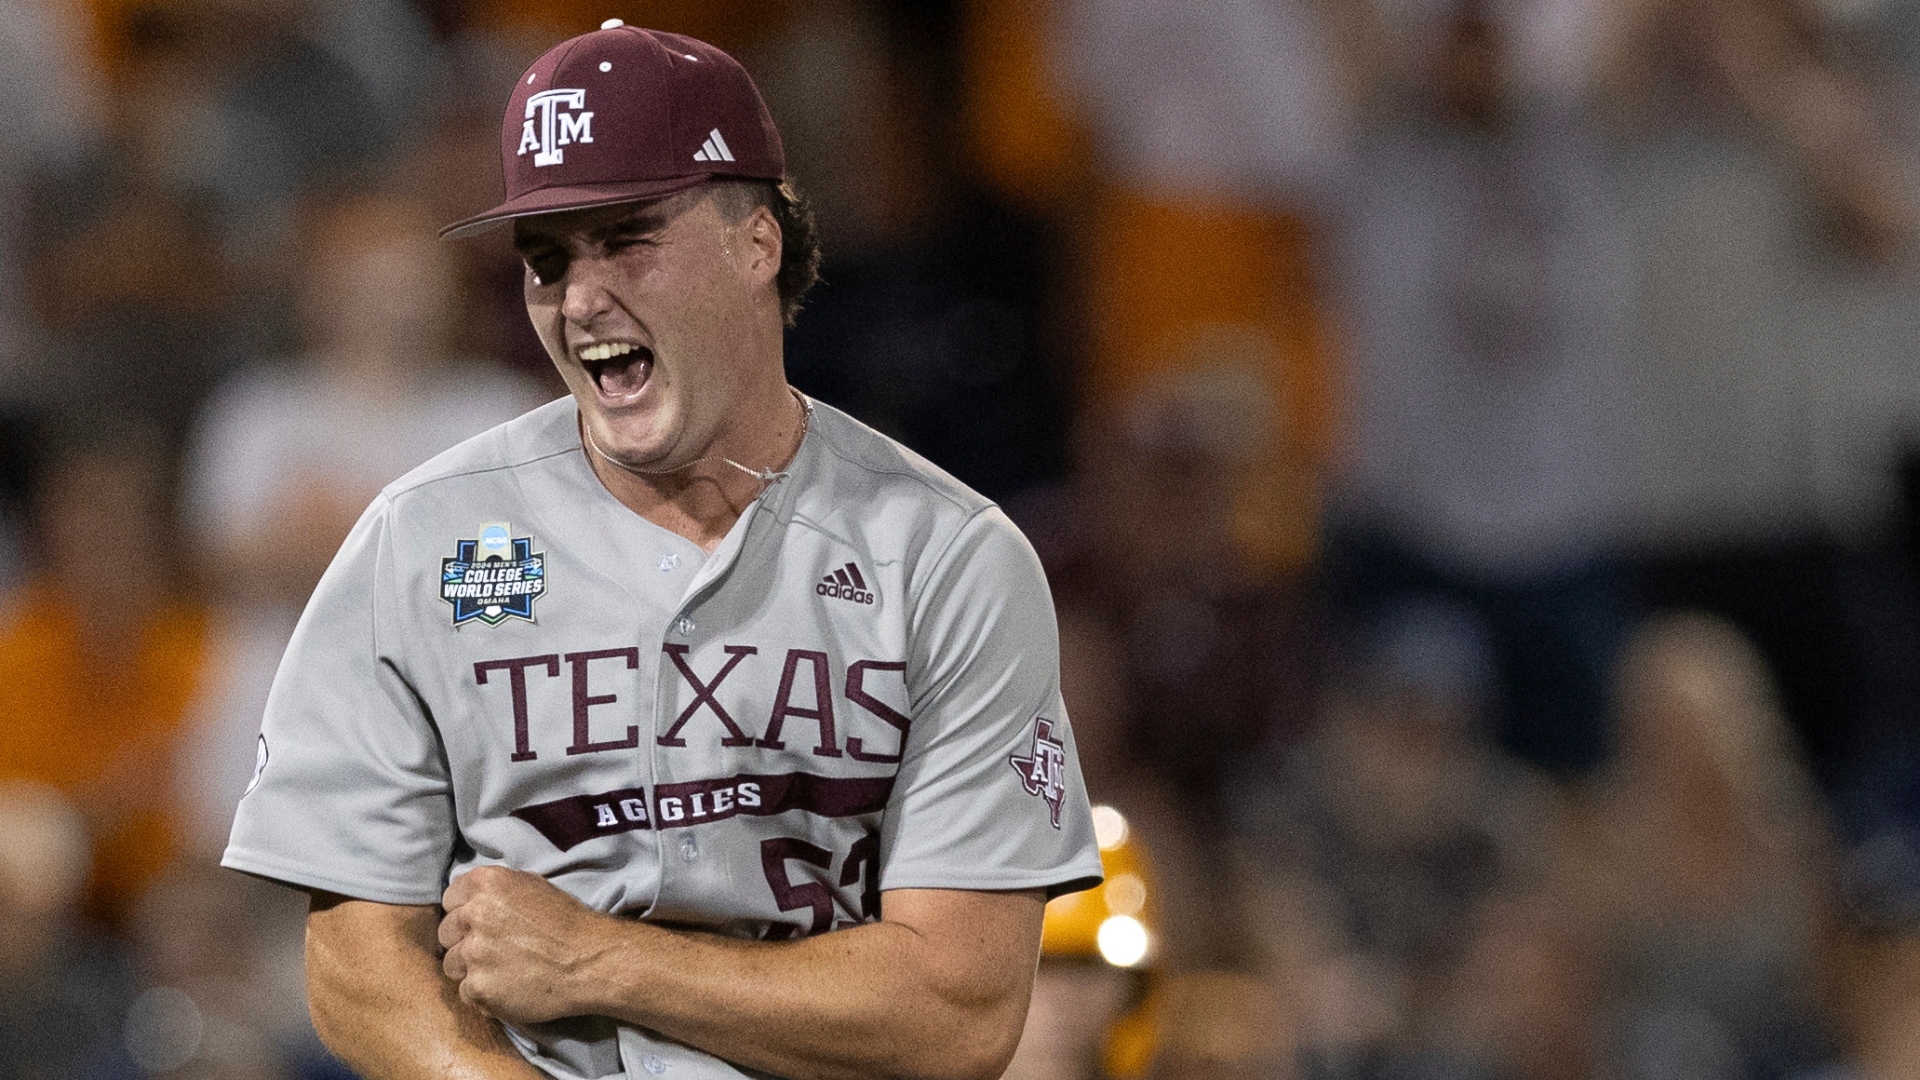 Evan Aschenbeck closes out Game 1 for Texas A&M with 7 strikeouts